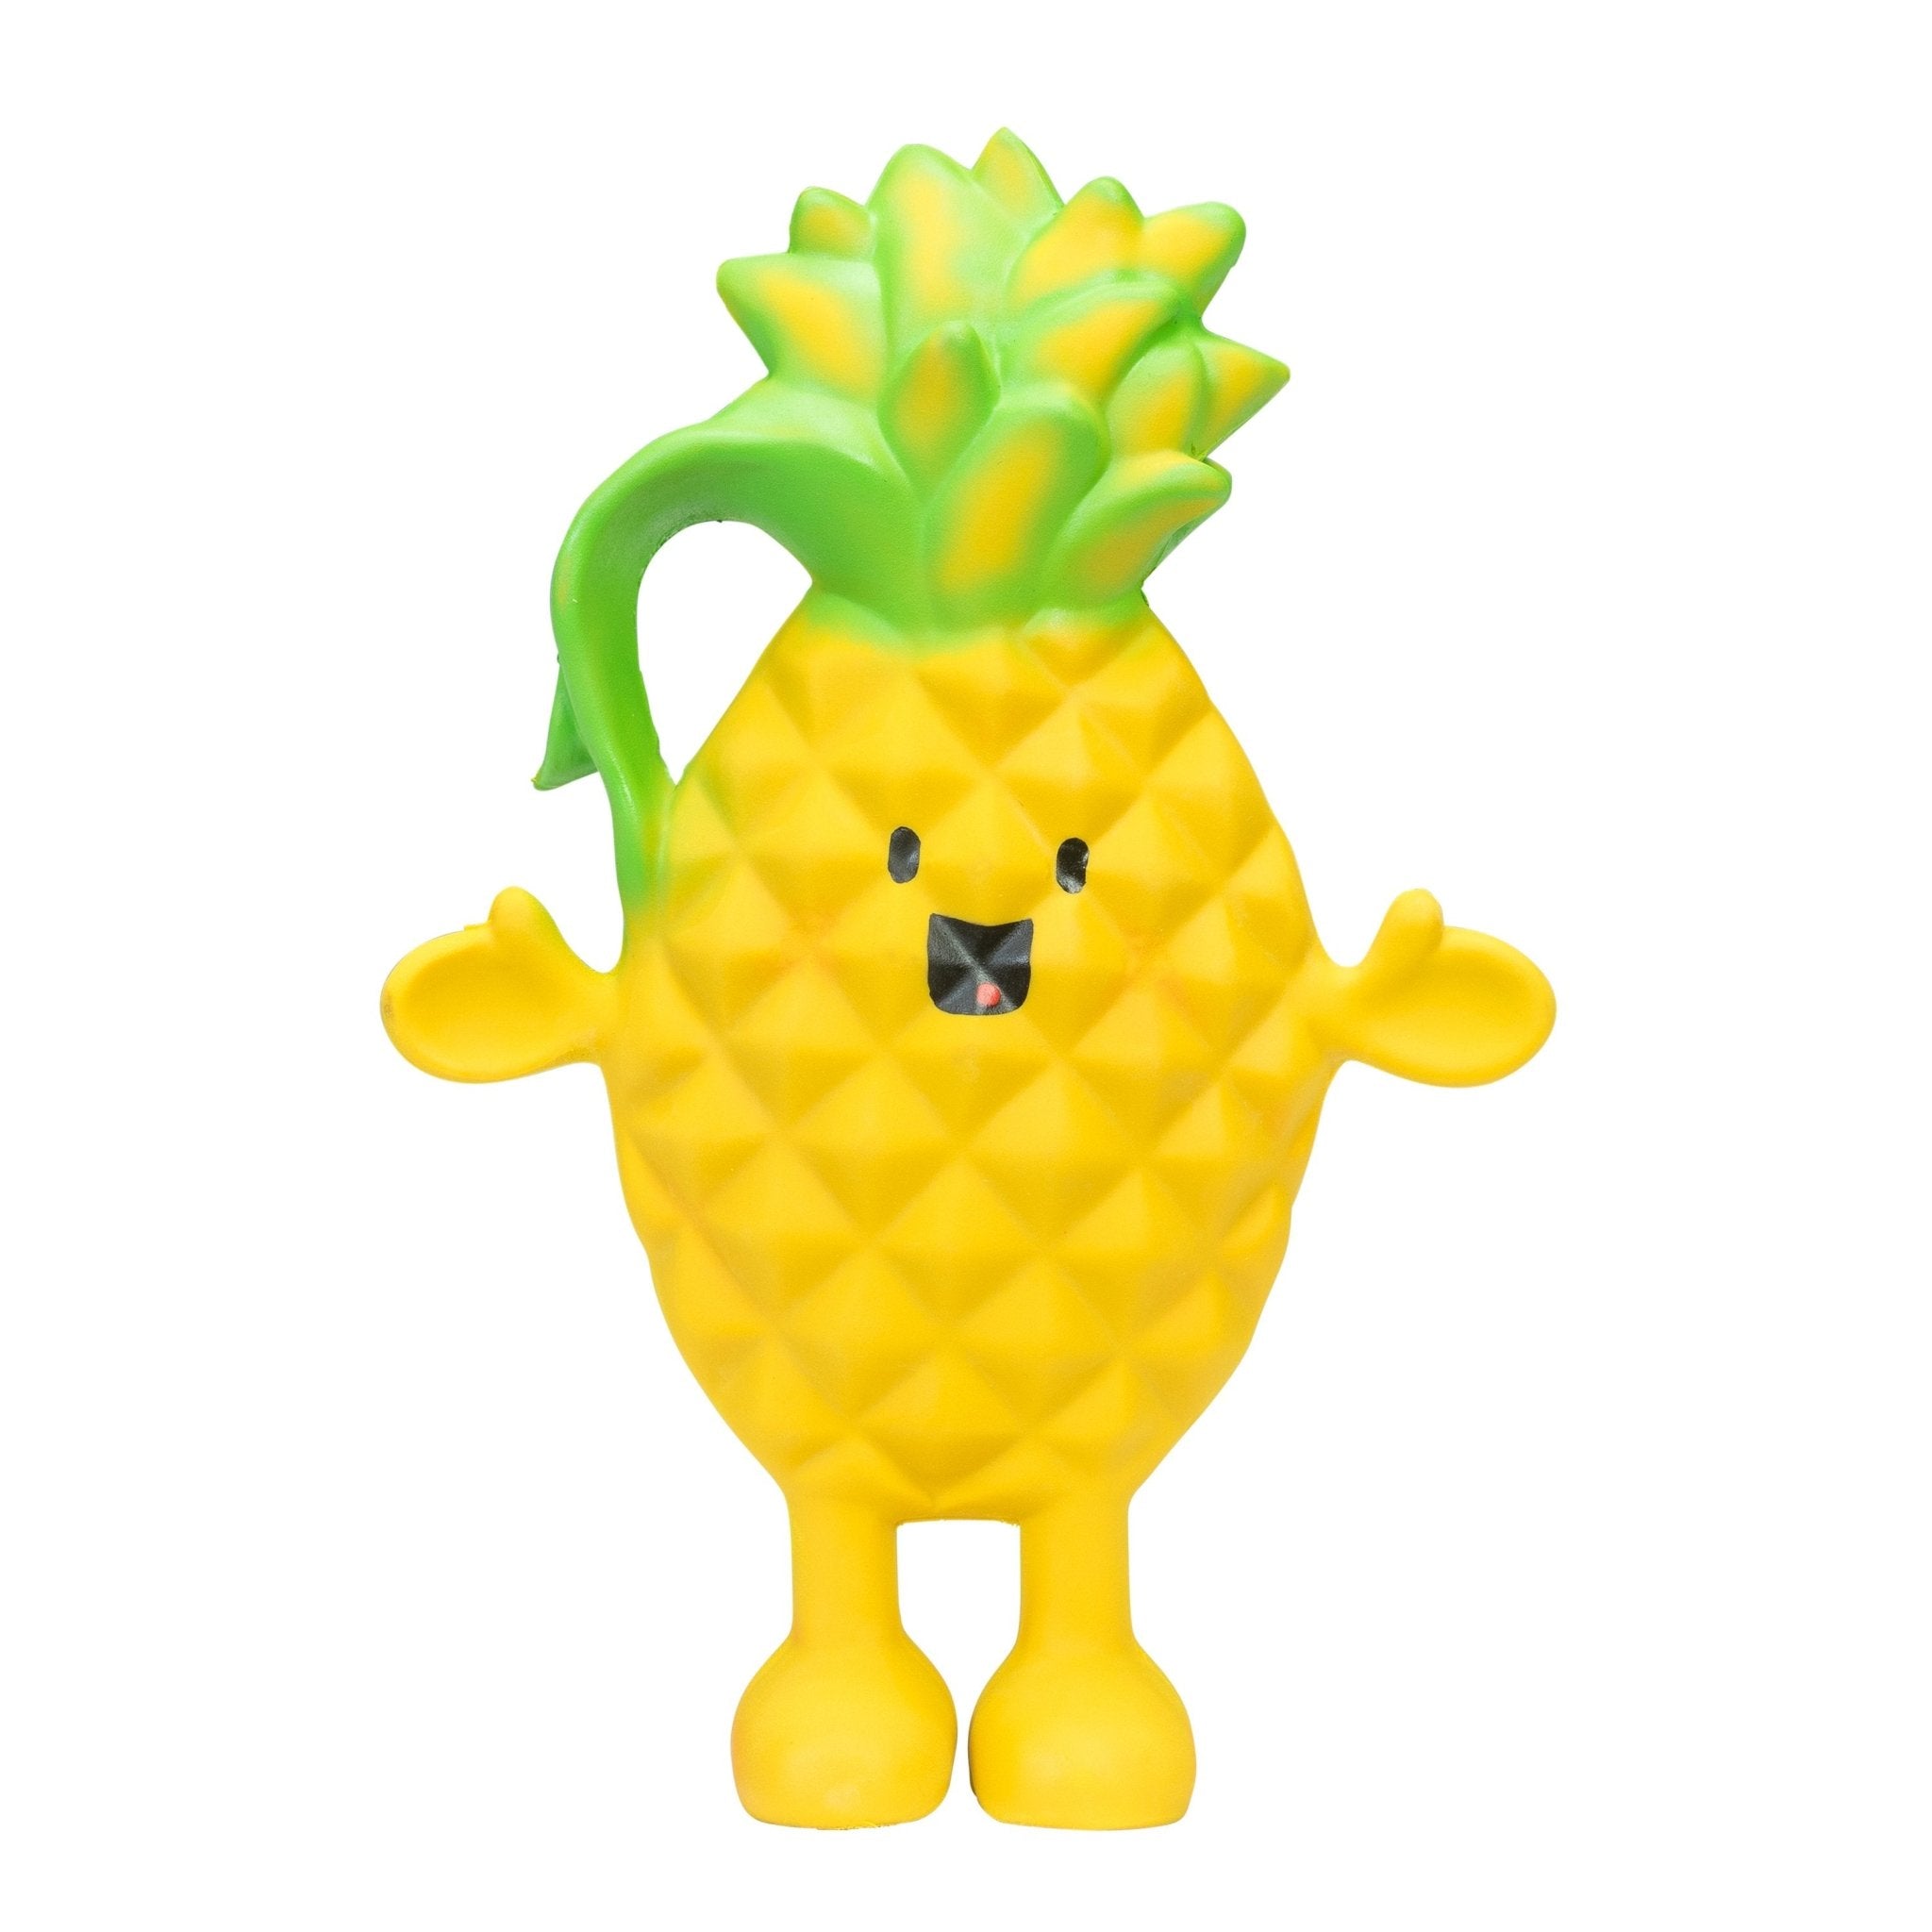 Polly Pineapple - ANB Baby -$20 - $50